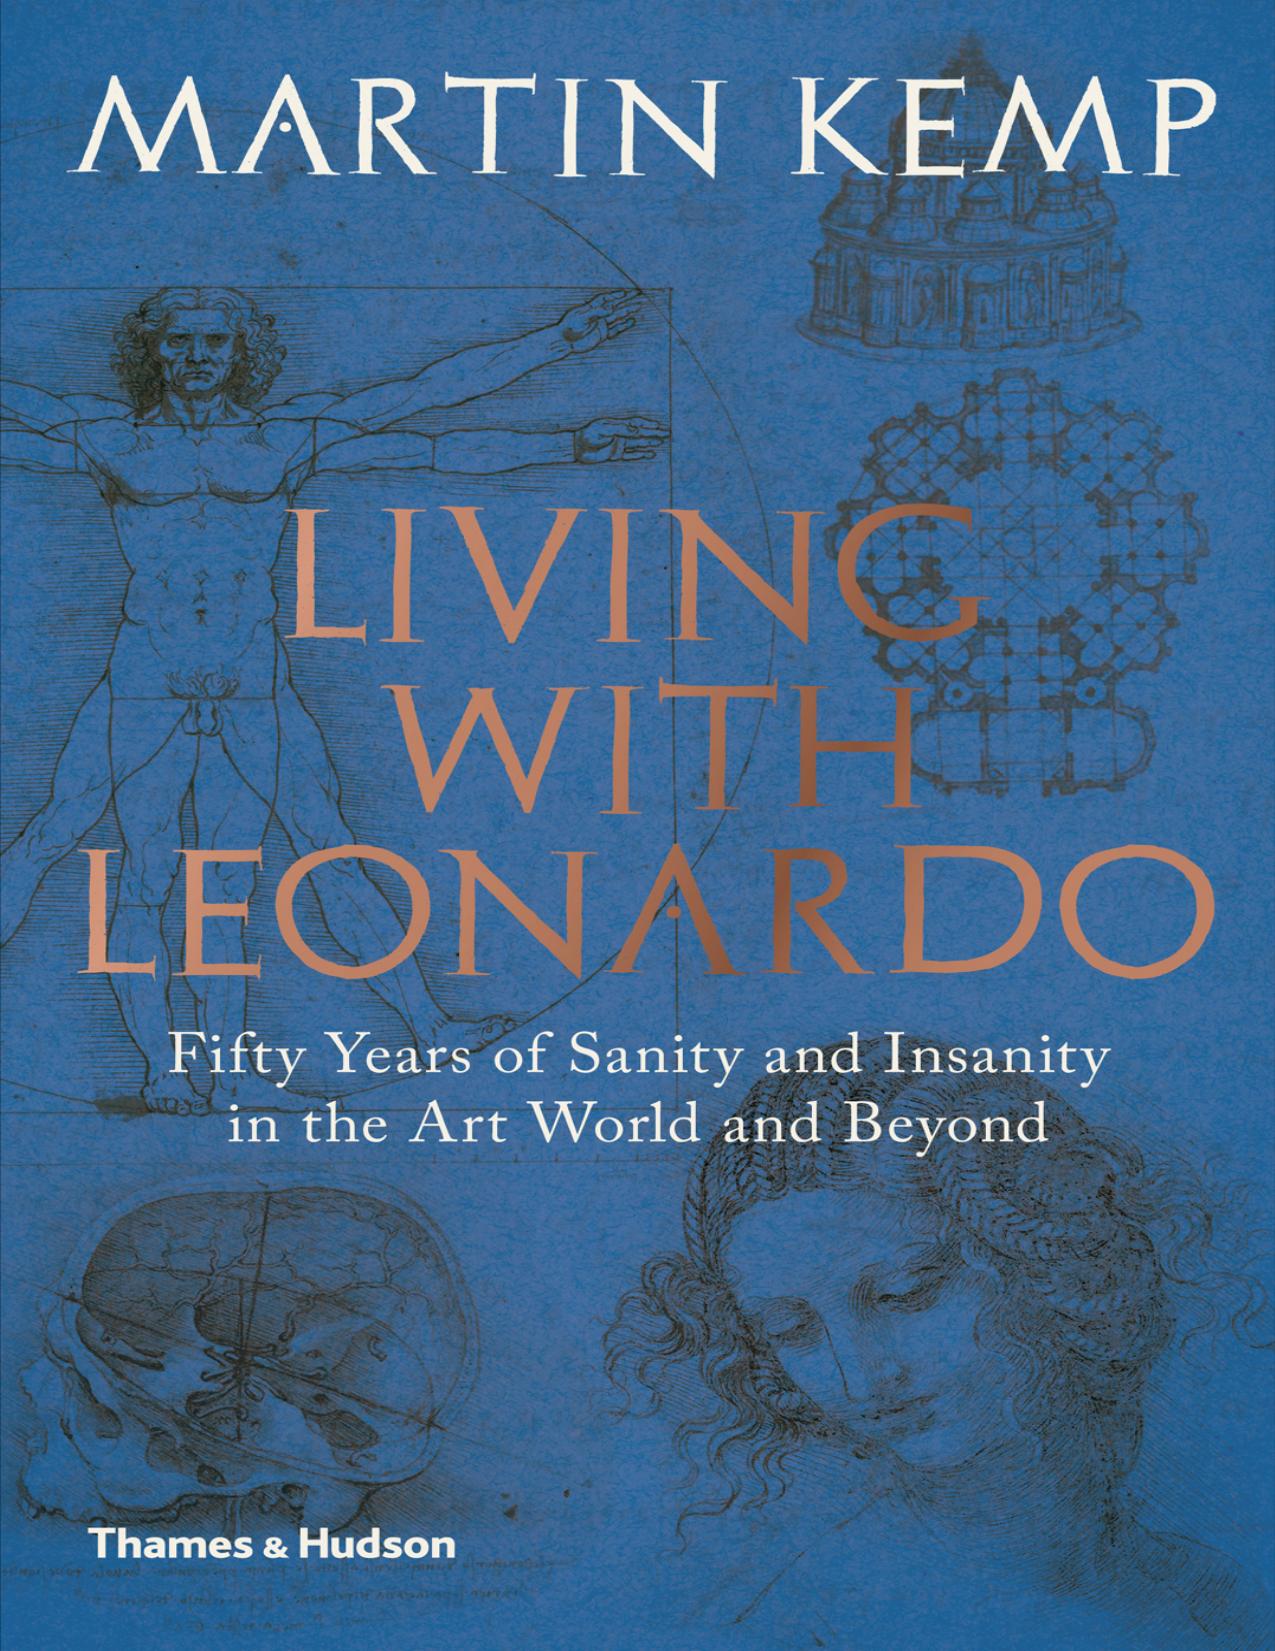 (eBook PDF)Living with Leonardo: Fifty Years of Sanity and Insanity in the Art World and Beyond by Martin Kemp